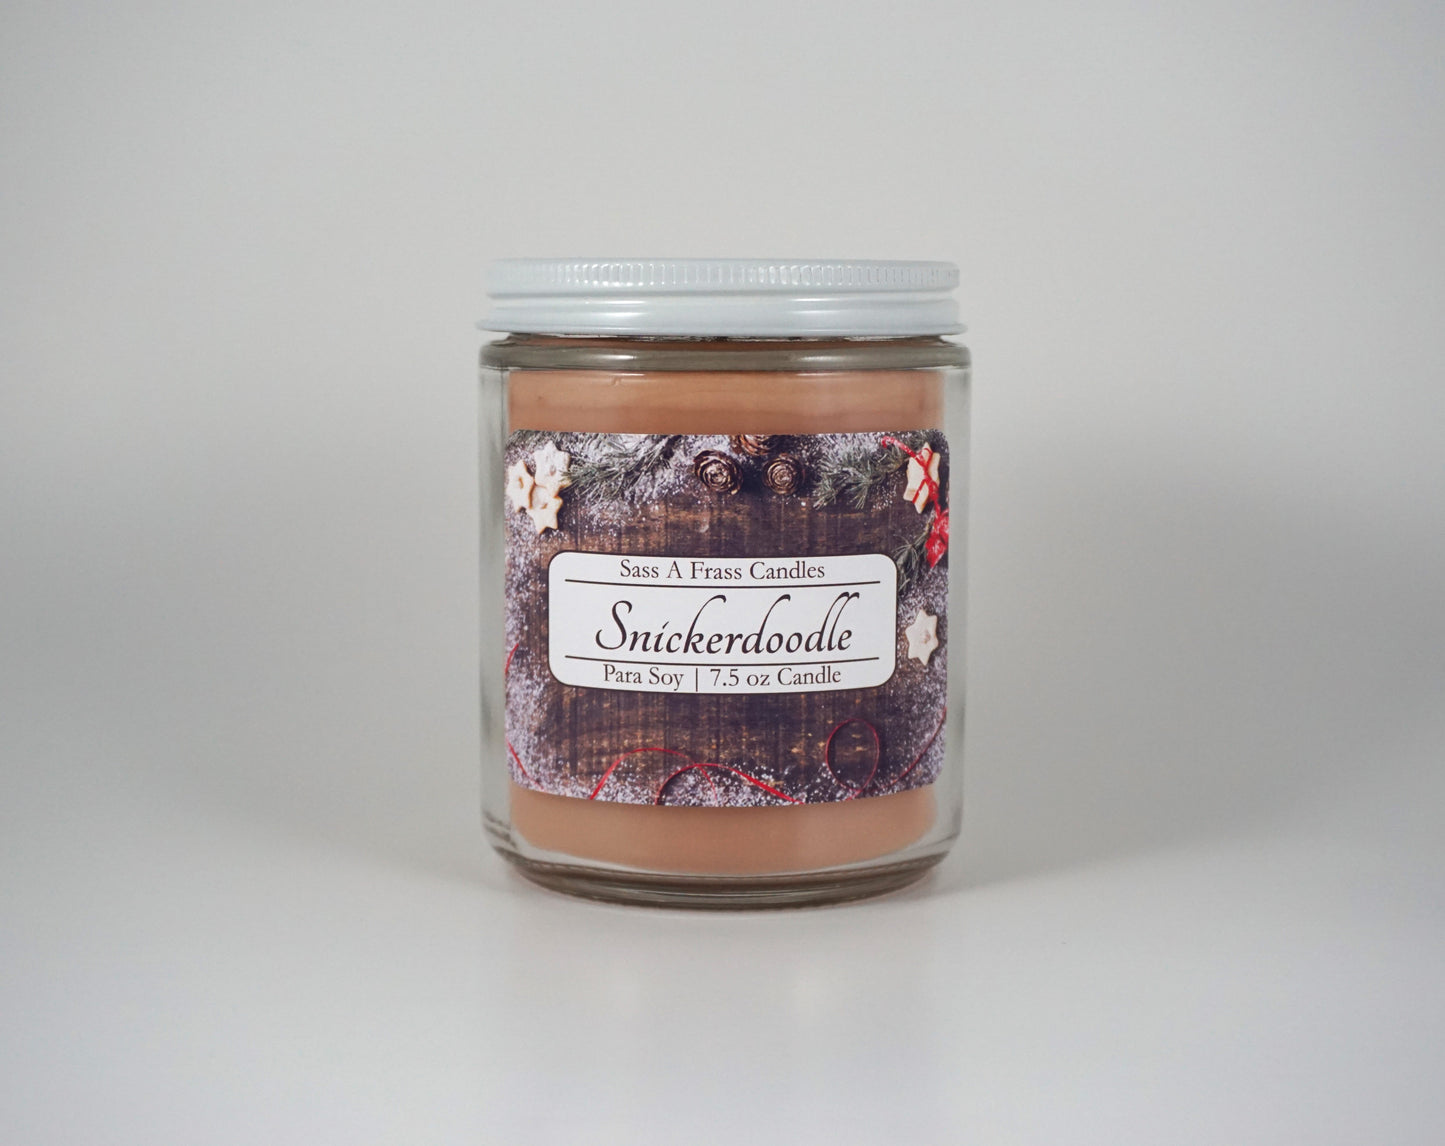 Snickerdoodle 7.5 oz Candle